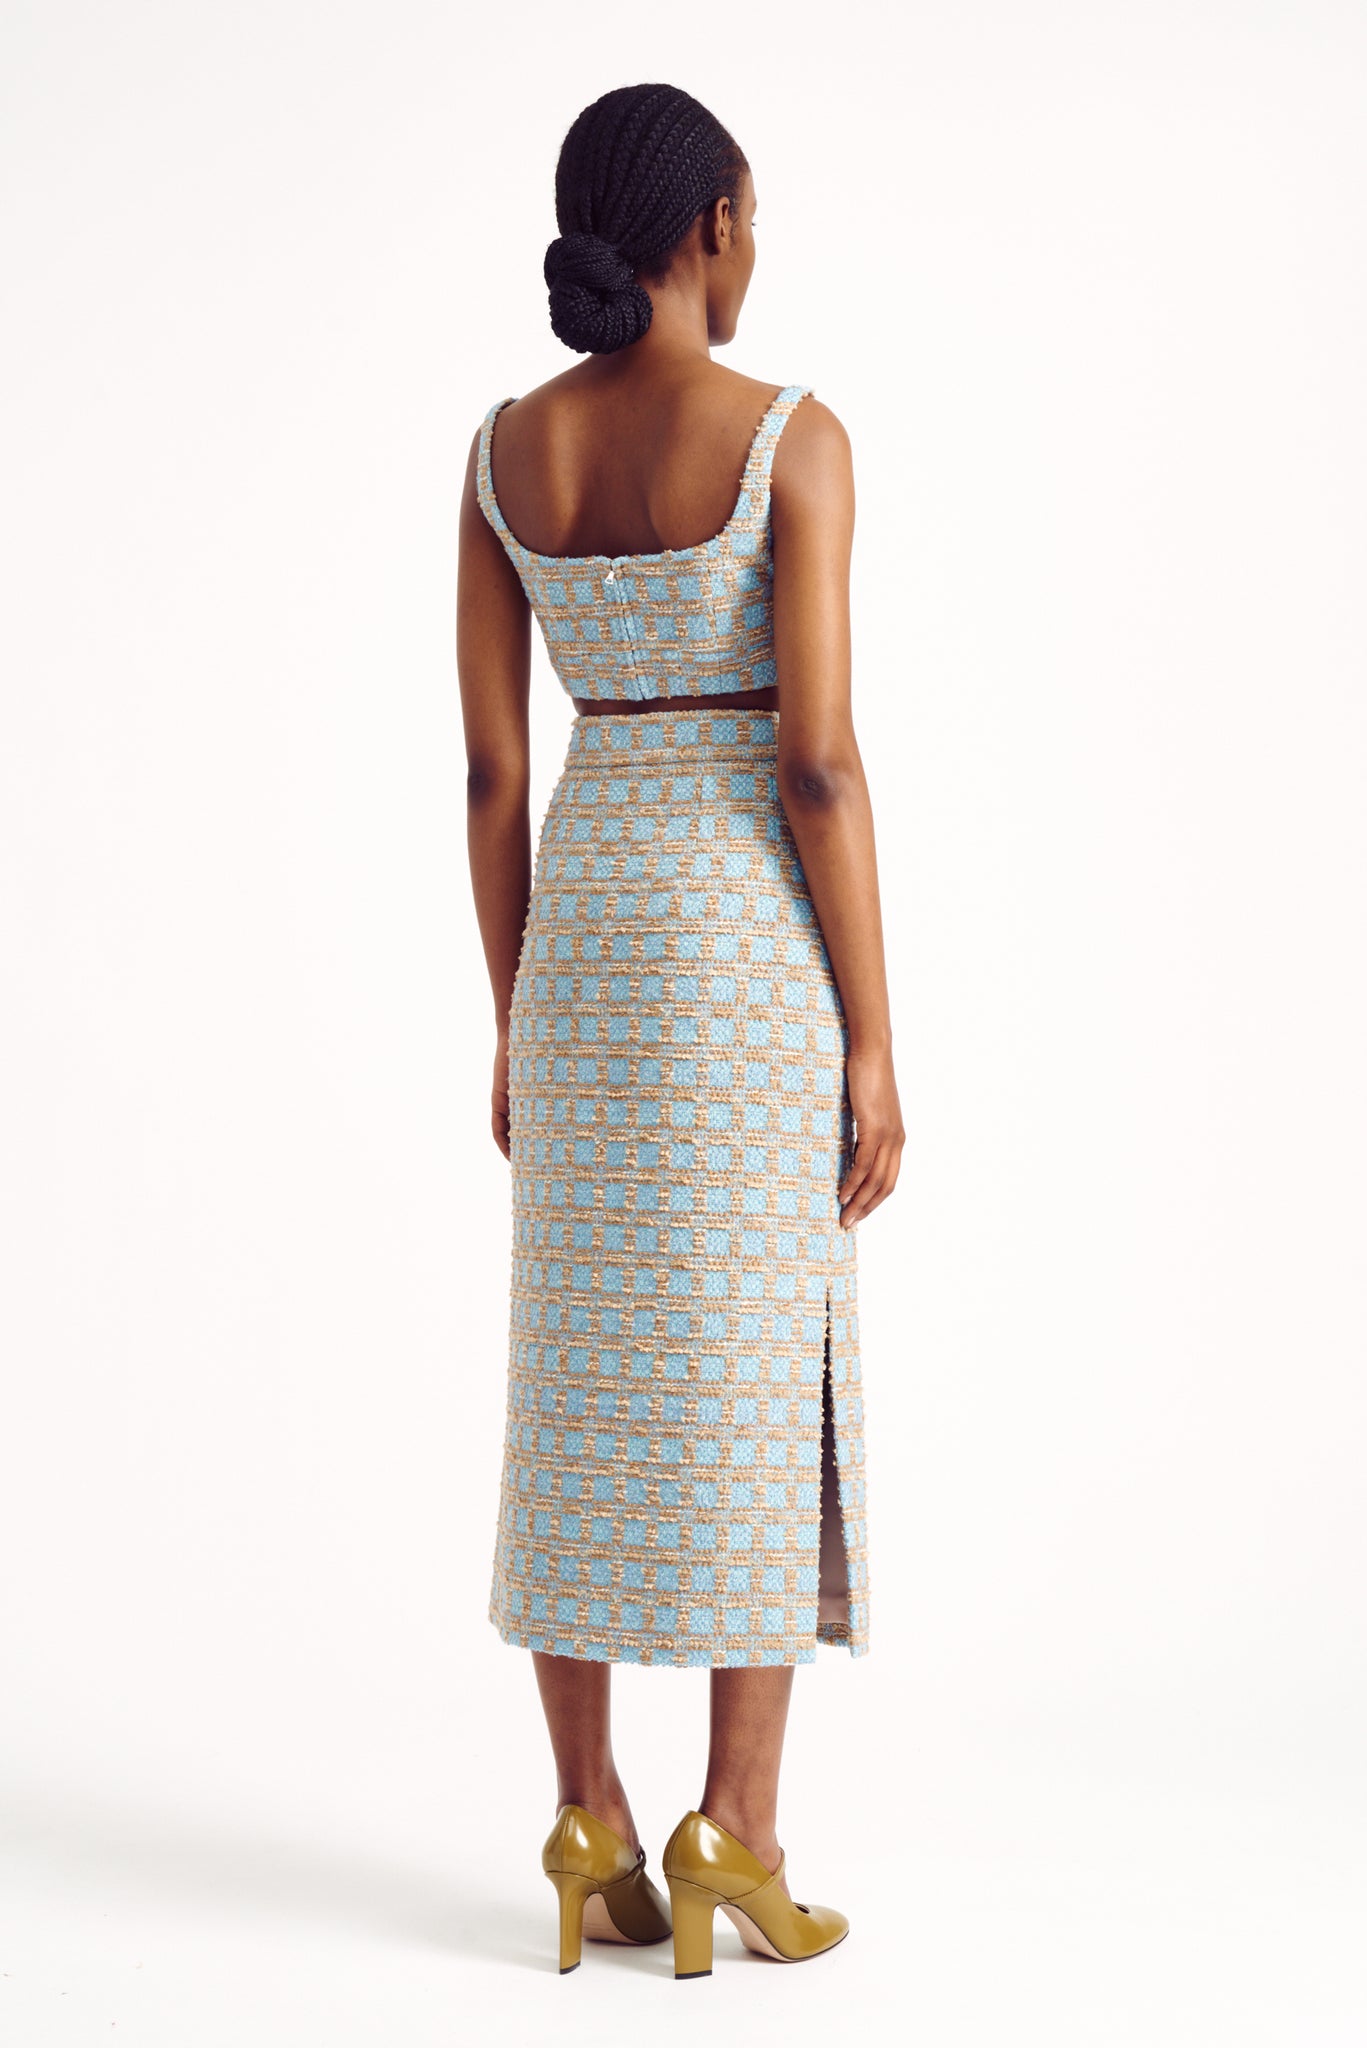 Ariceli Skirt in Beige And Blue Check Boucle | Emilia Wickstead